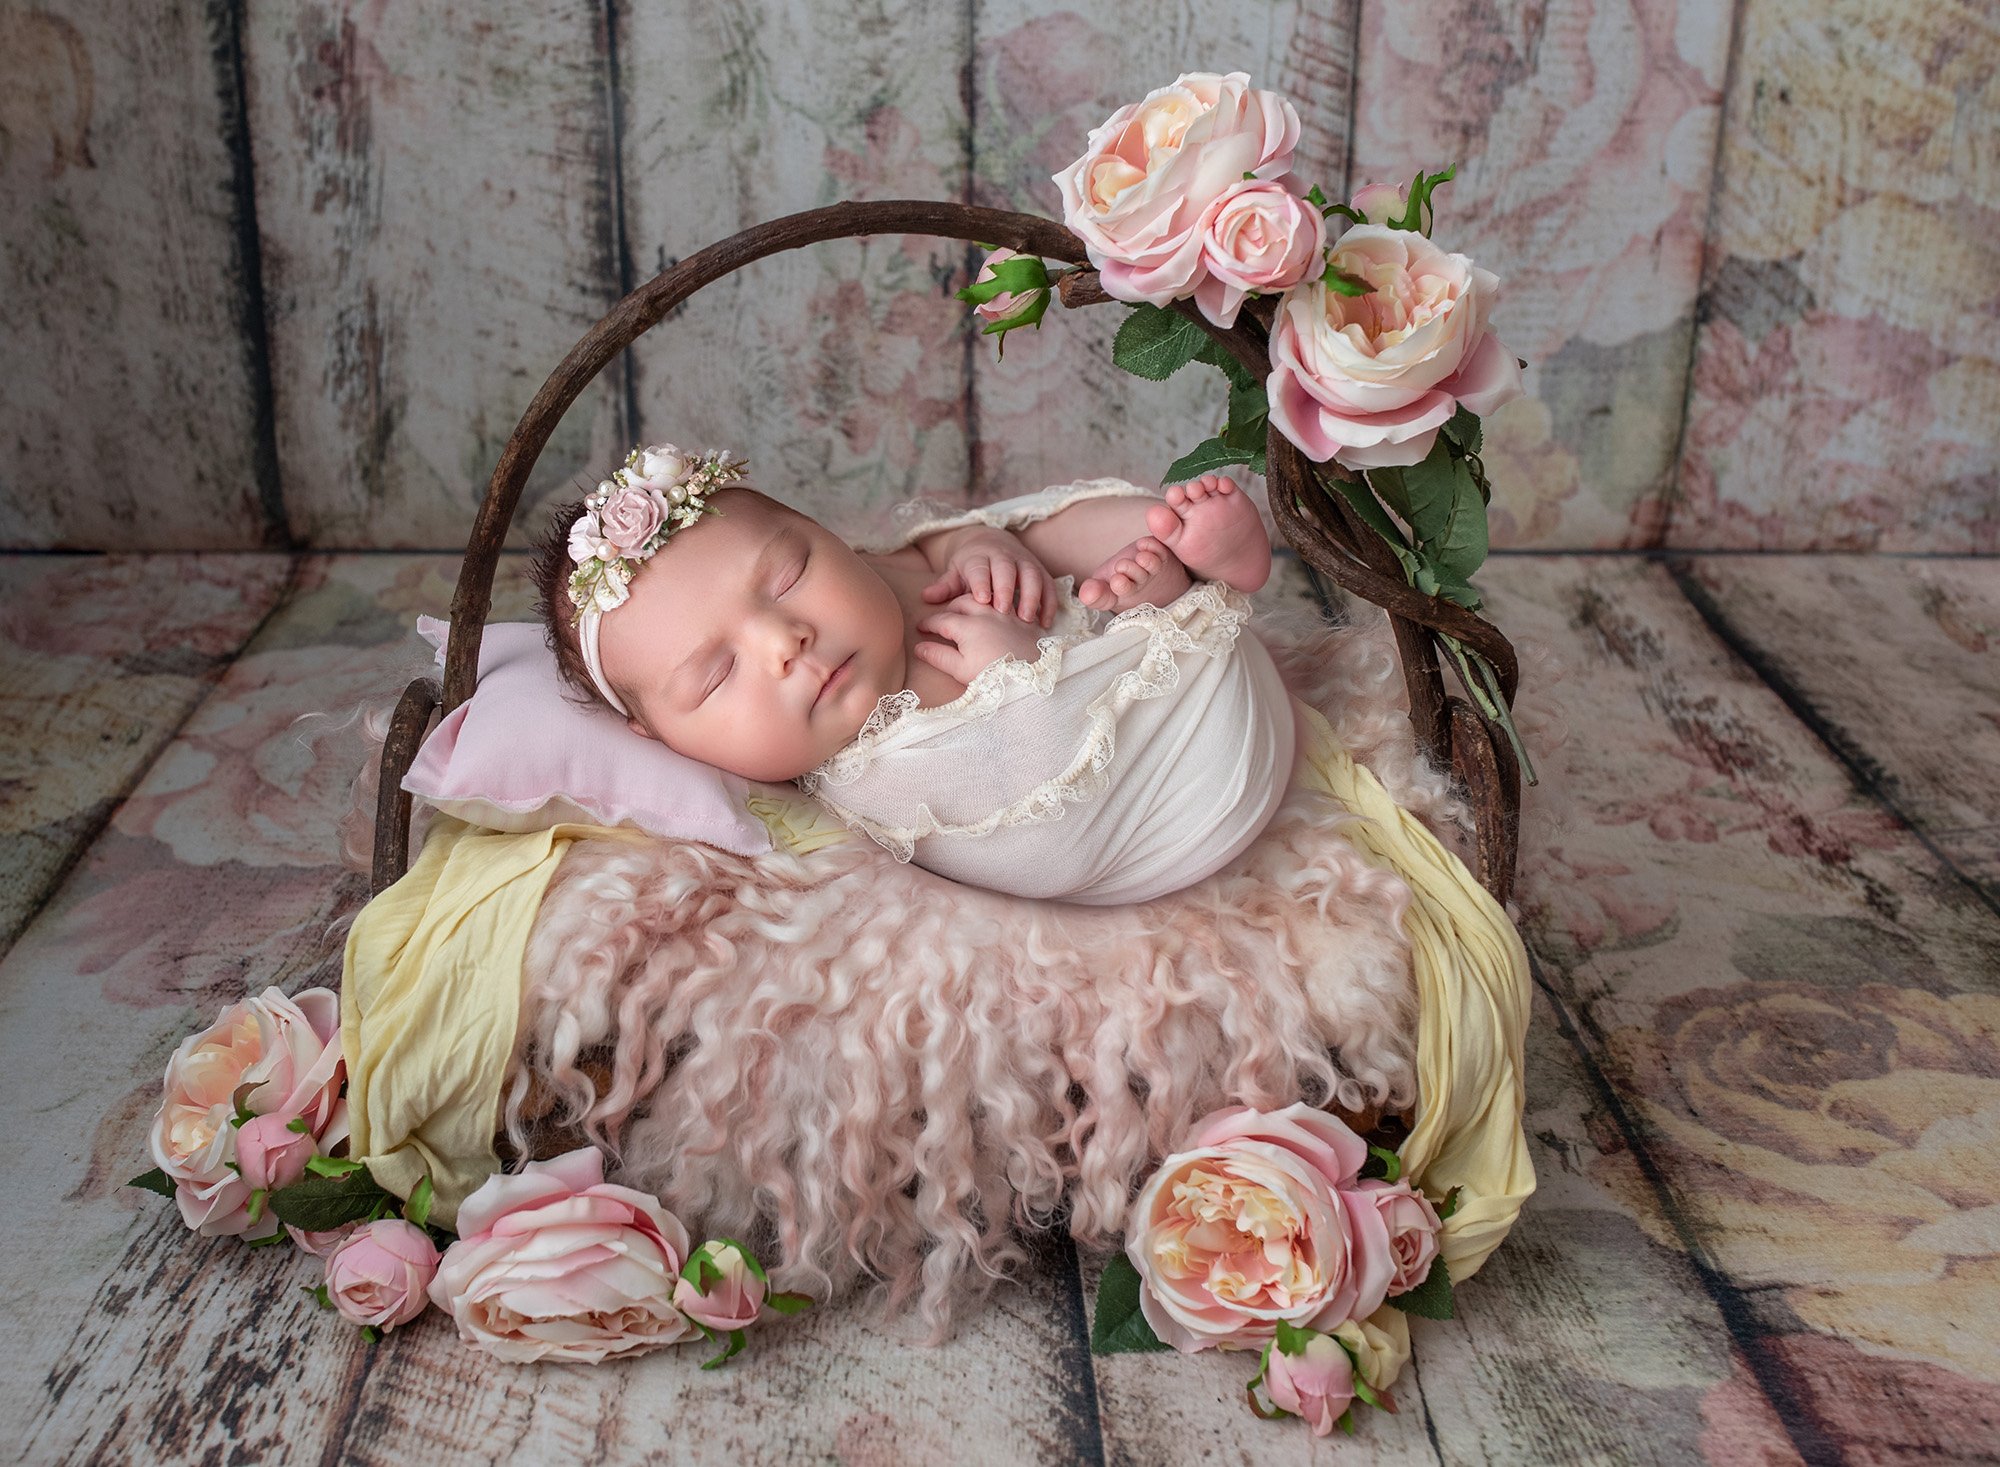 newborn baby girl swaddled in lace wrap sleeping on top of rustic wooden bed with pink fuzzy blanket surrounded by pink flowers on floral background